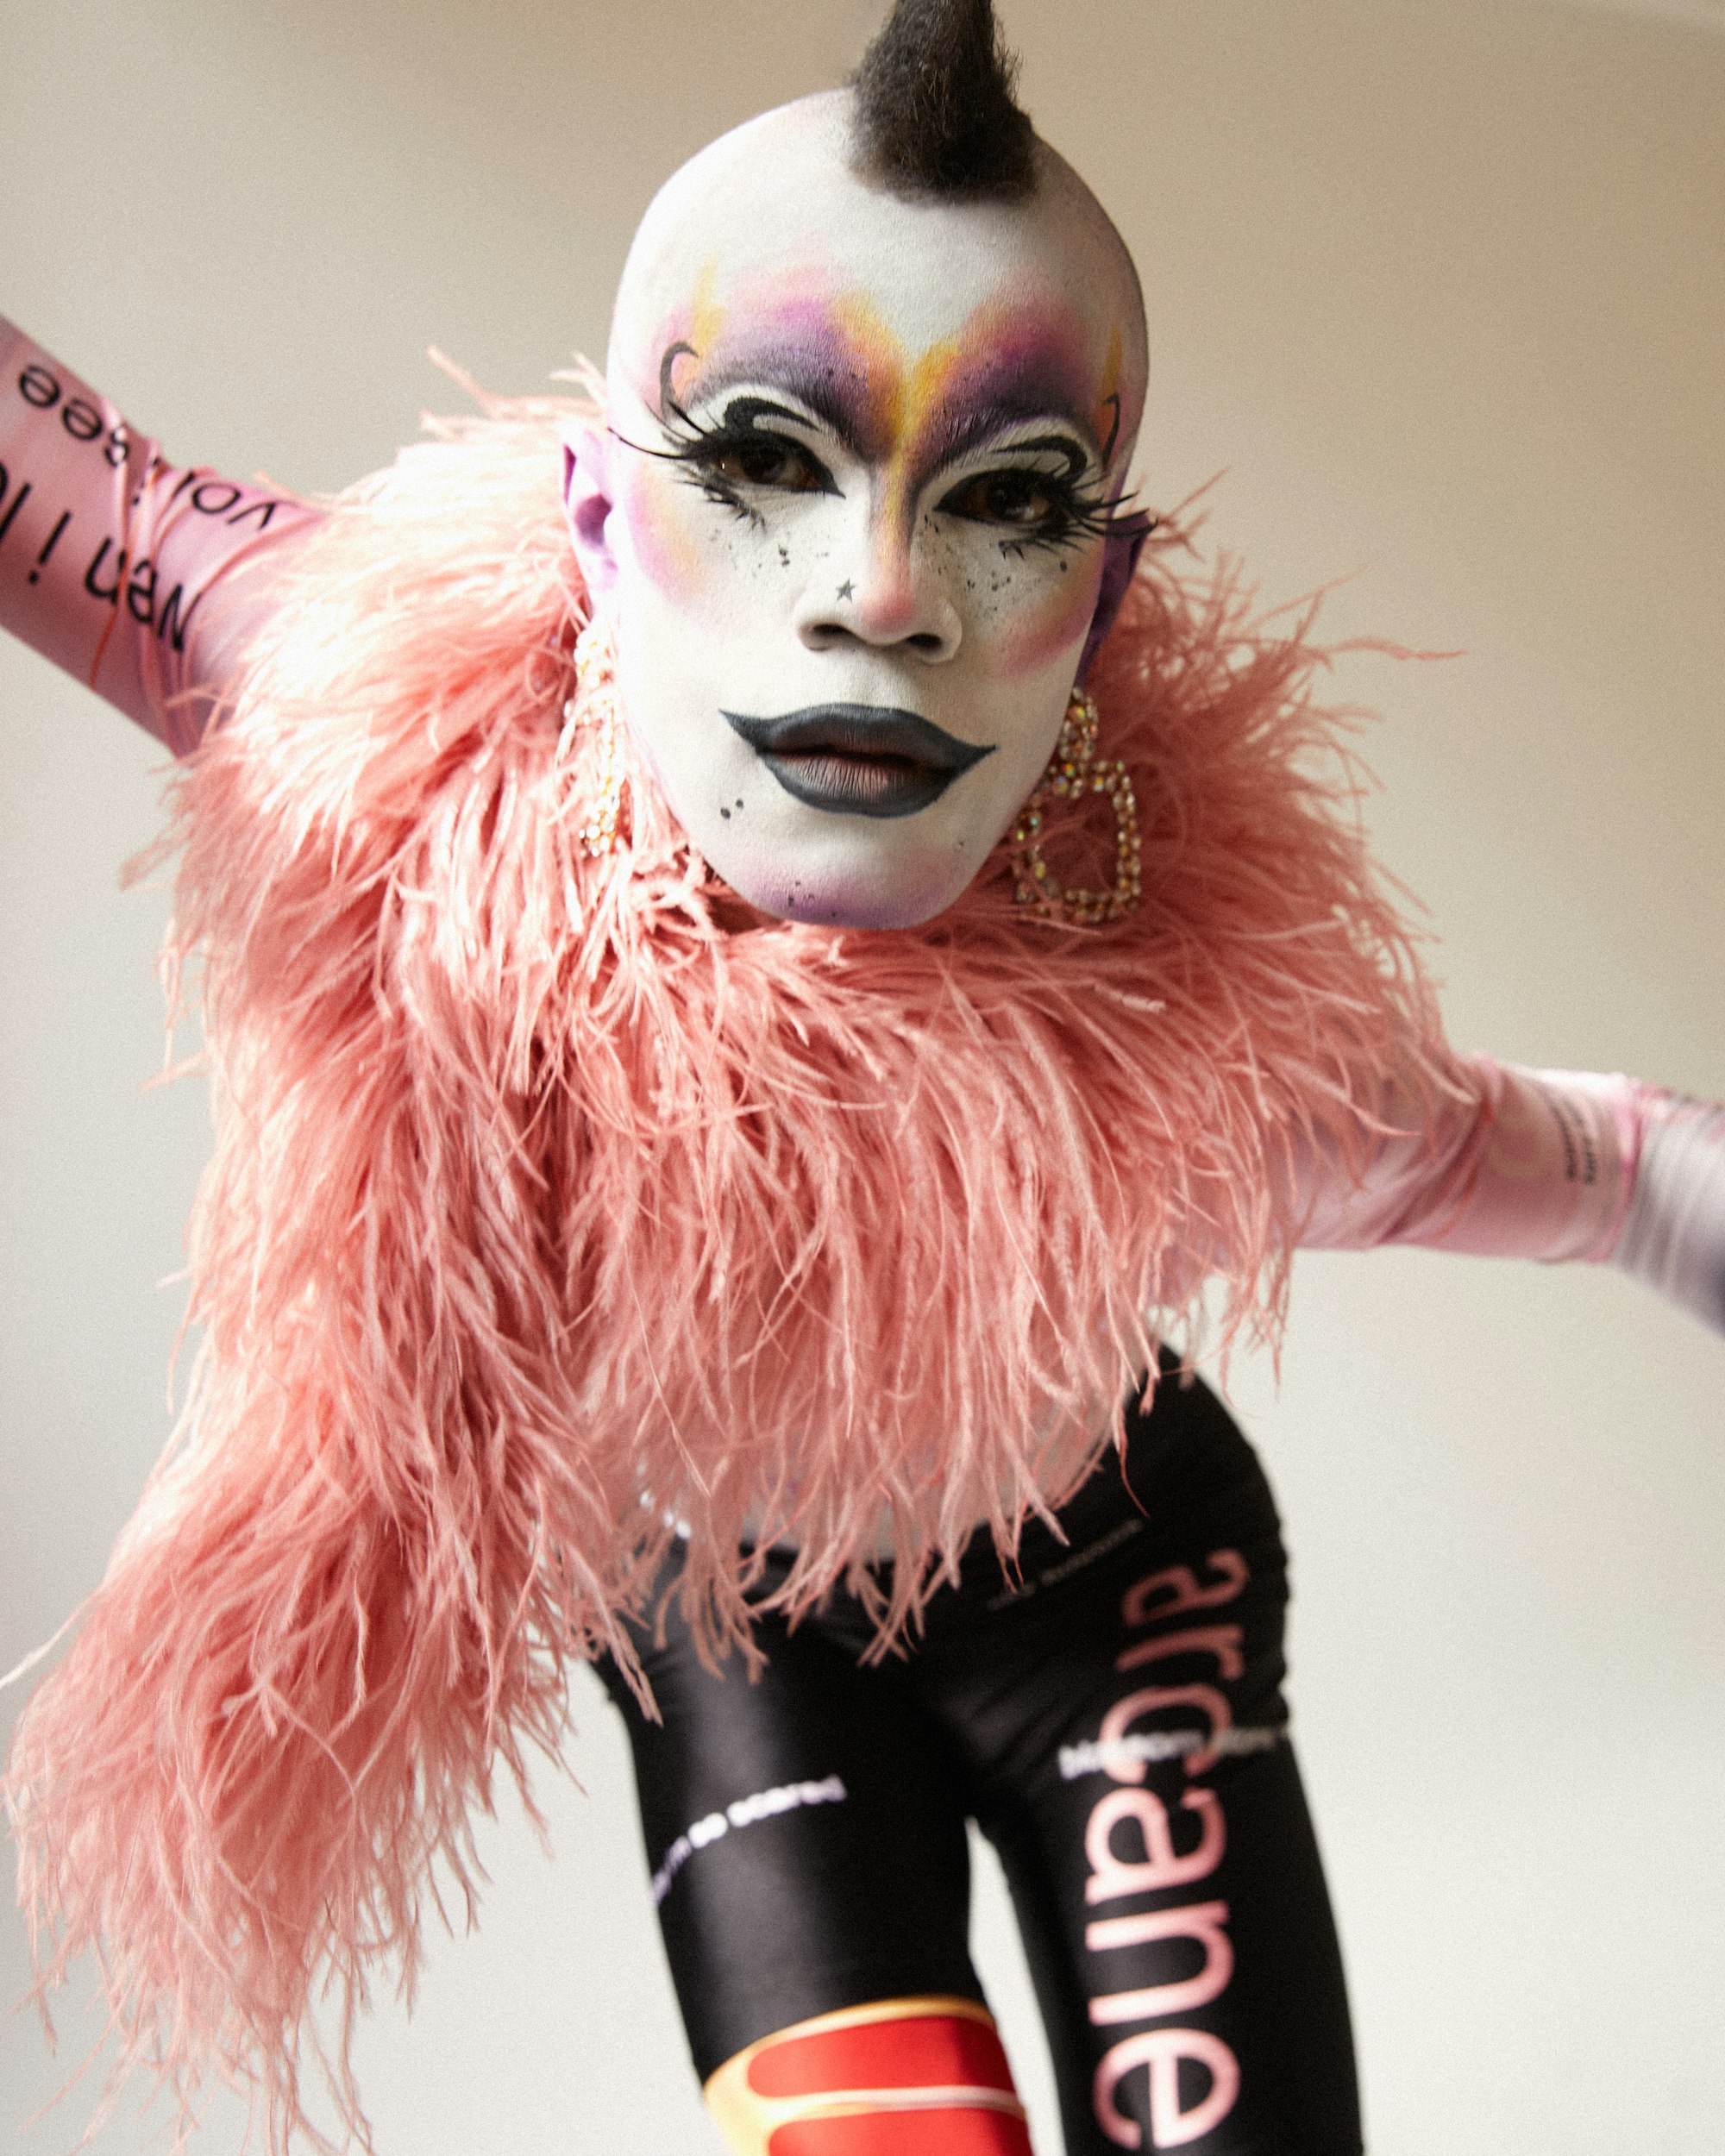 A person in heavy make-up wearing pale pink feathers and big earrings